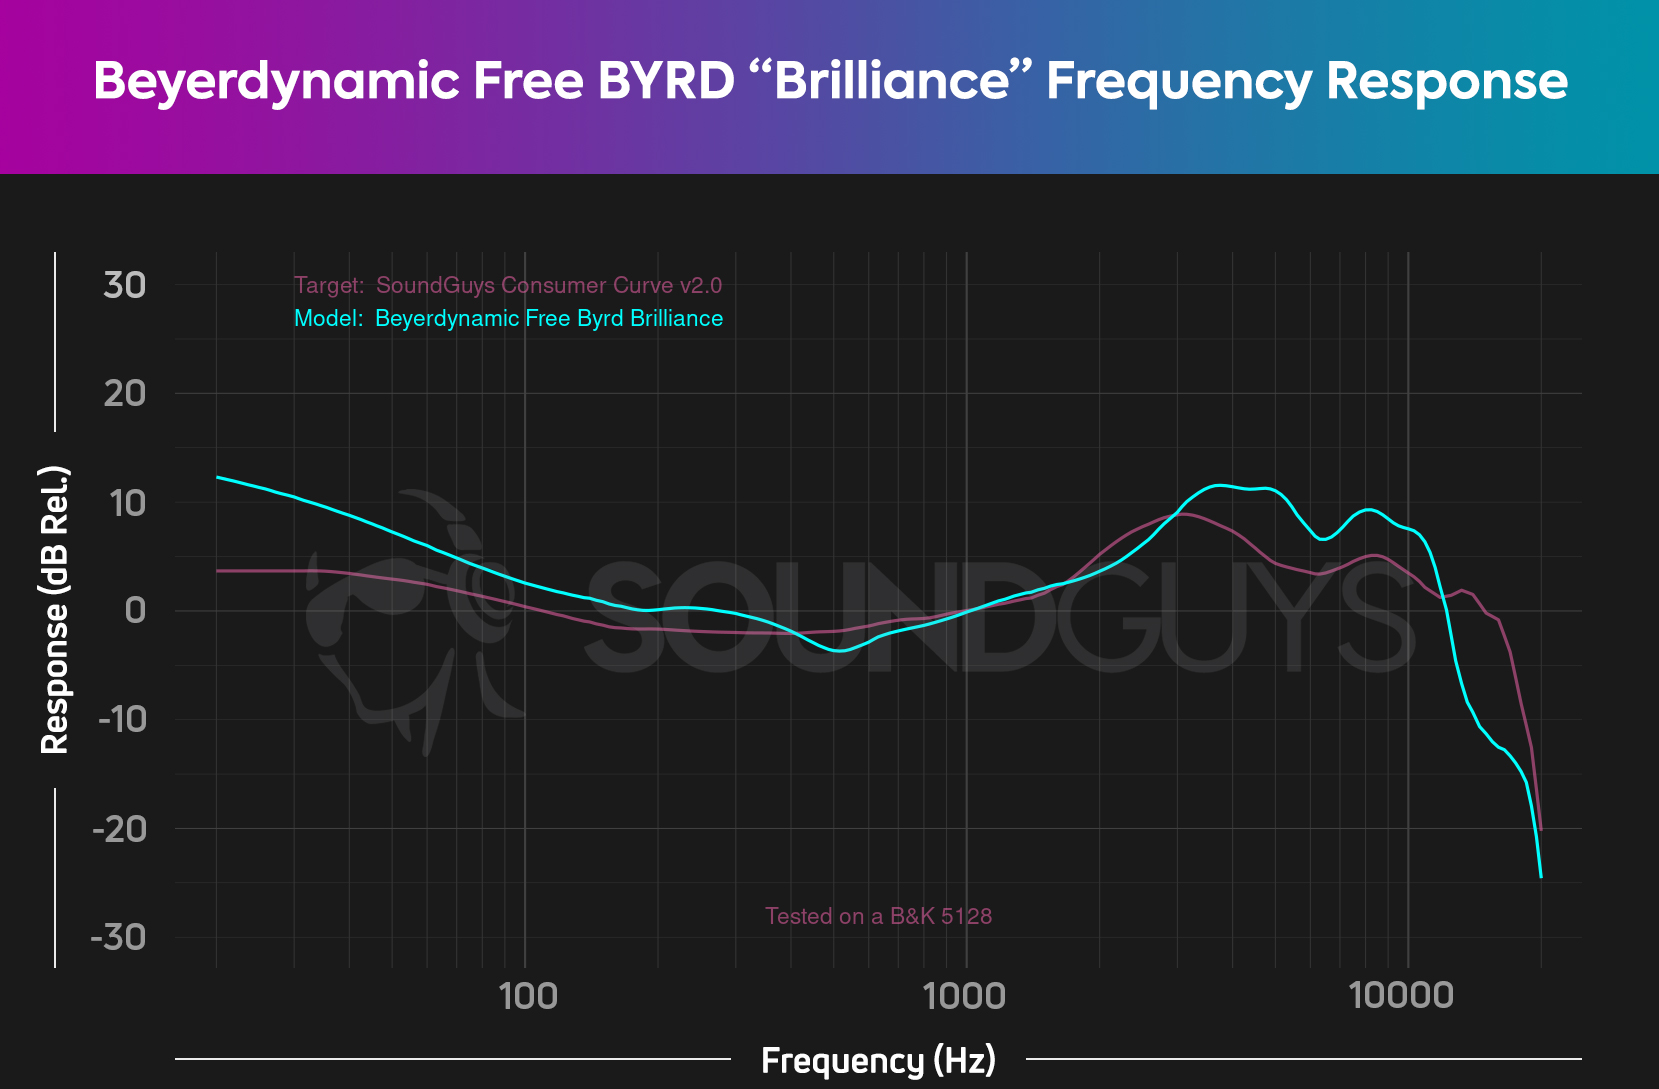 A chart depicts the Beyerdynamic Free BYRD frequency response with the "Brilliance" EQ preset, and it most closely follows our consumer curve.